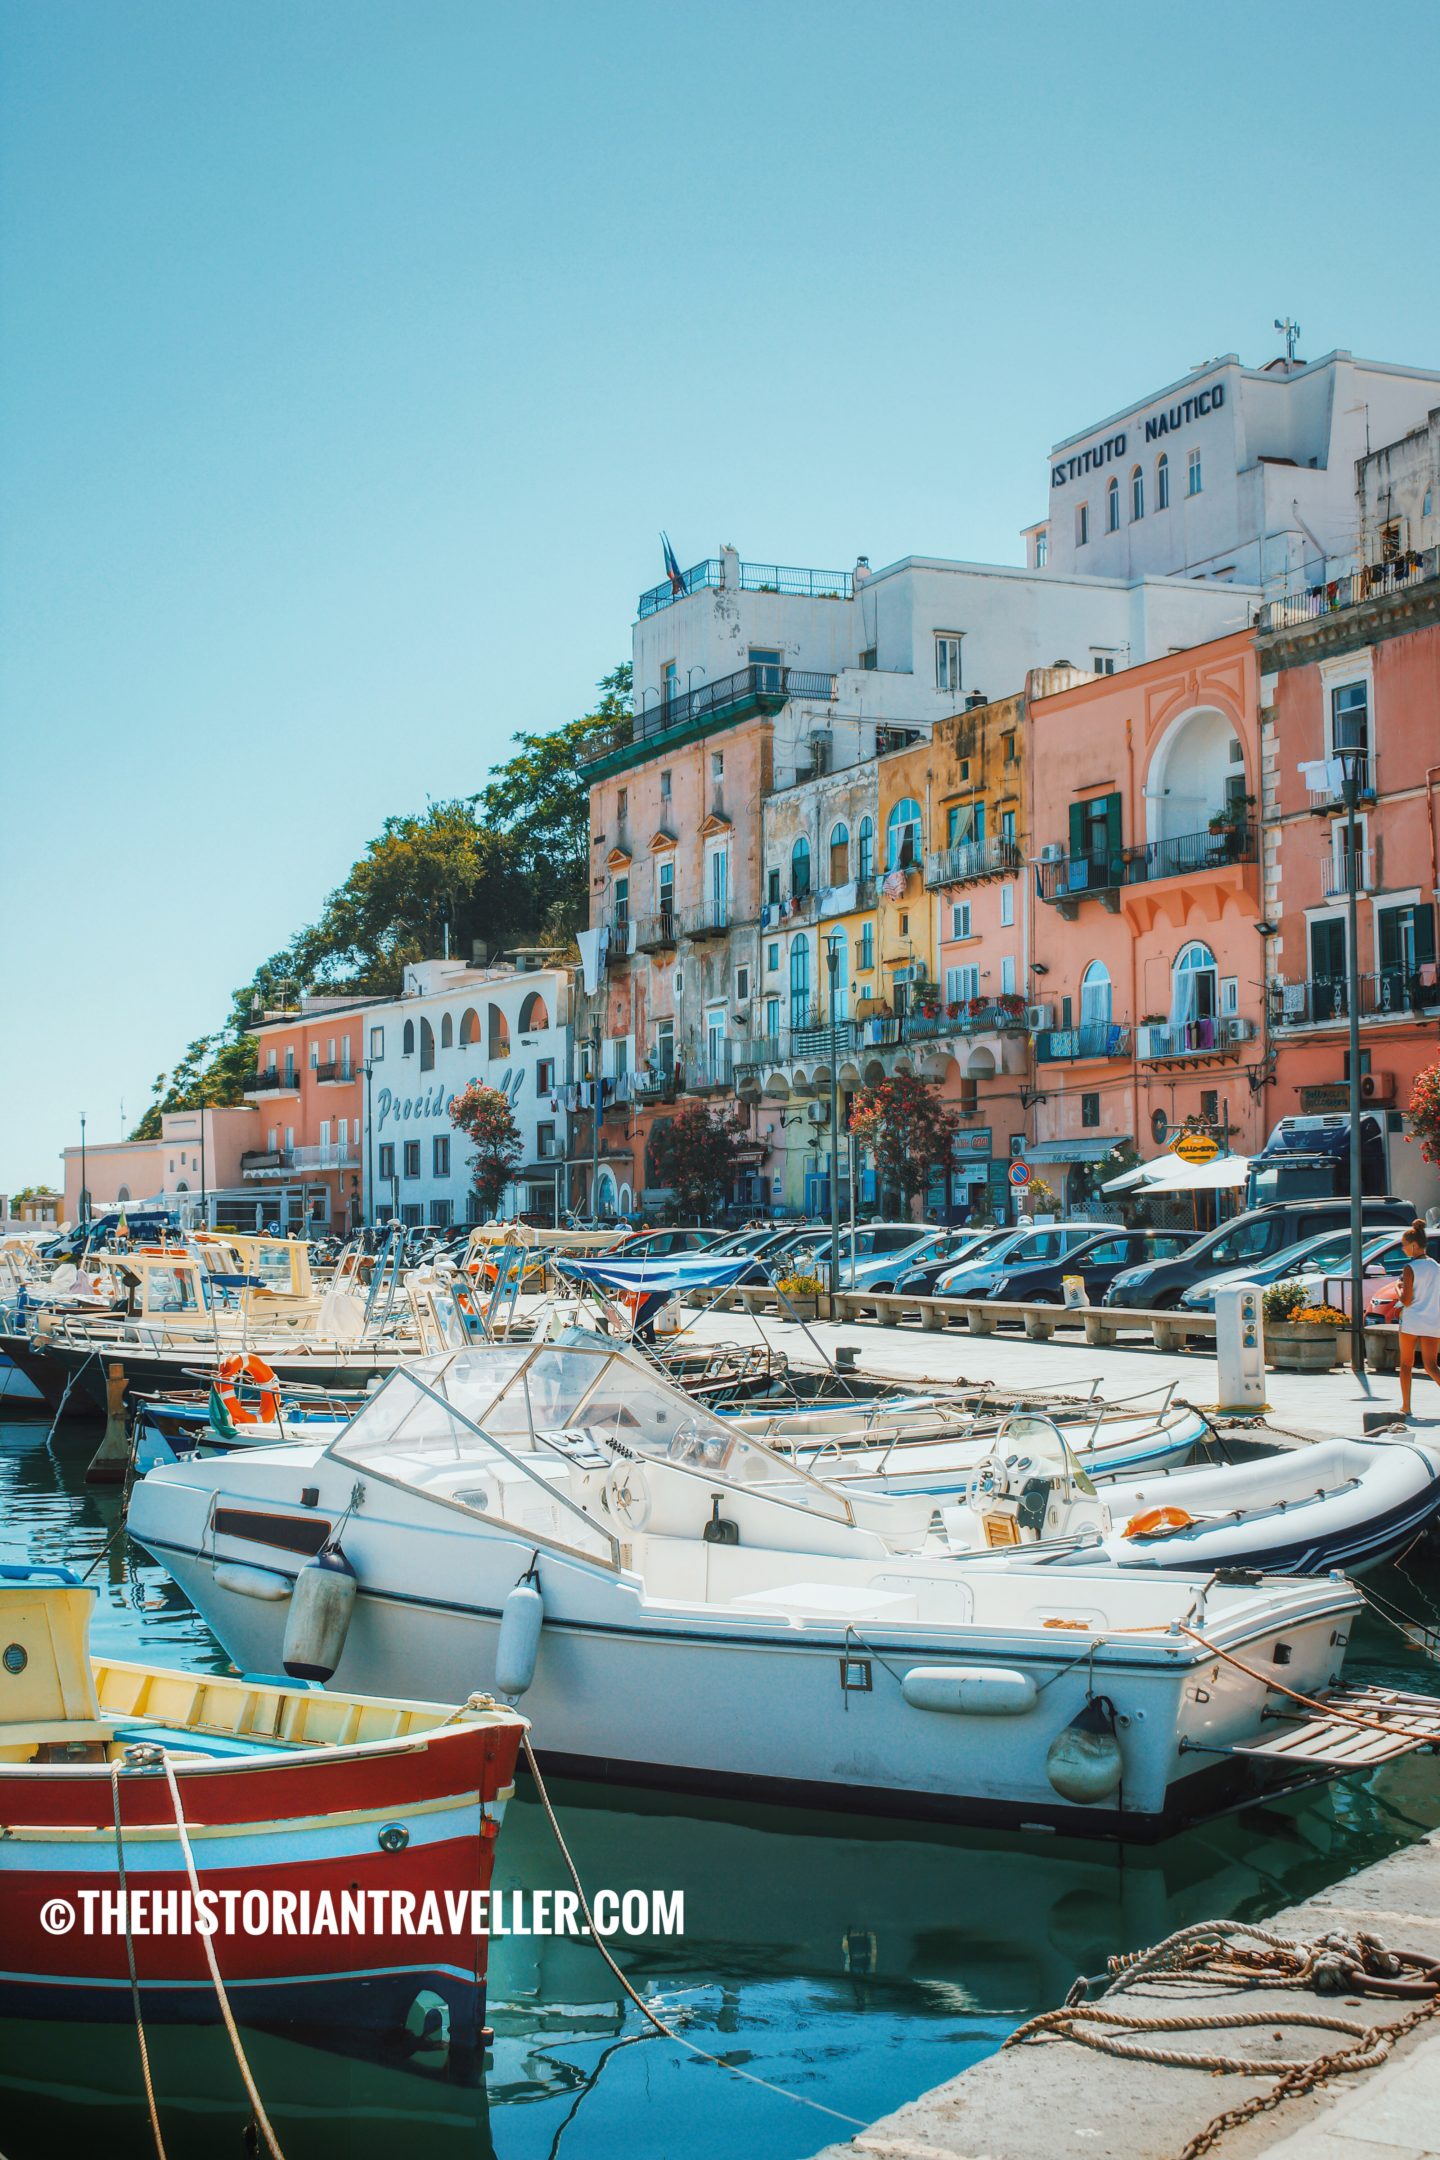 Organise a day trip to Procida